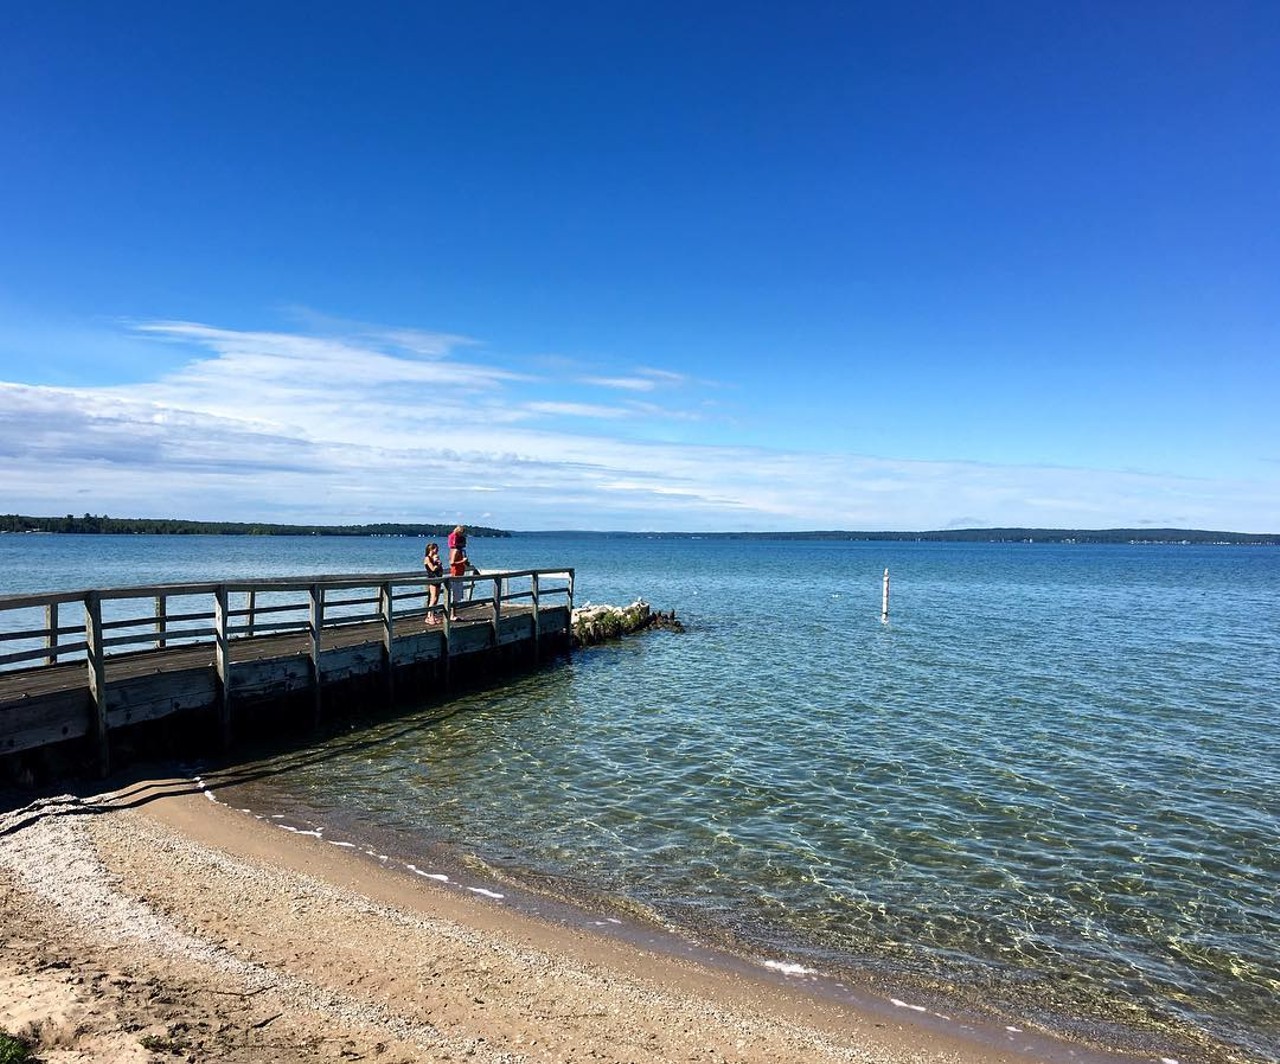 Aloha State Park | Cheboygan | 3 hours, 55 minutes 
Just a little bit outside of Cheboygan sits a secret hiding place from the bustle of the small city: Aloha State Park. It has all of the attractions you could want from a state park without the crowd.(Photo via Instagram, @andiripley)